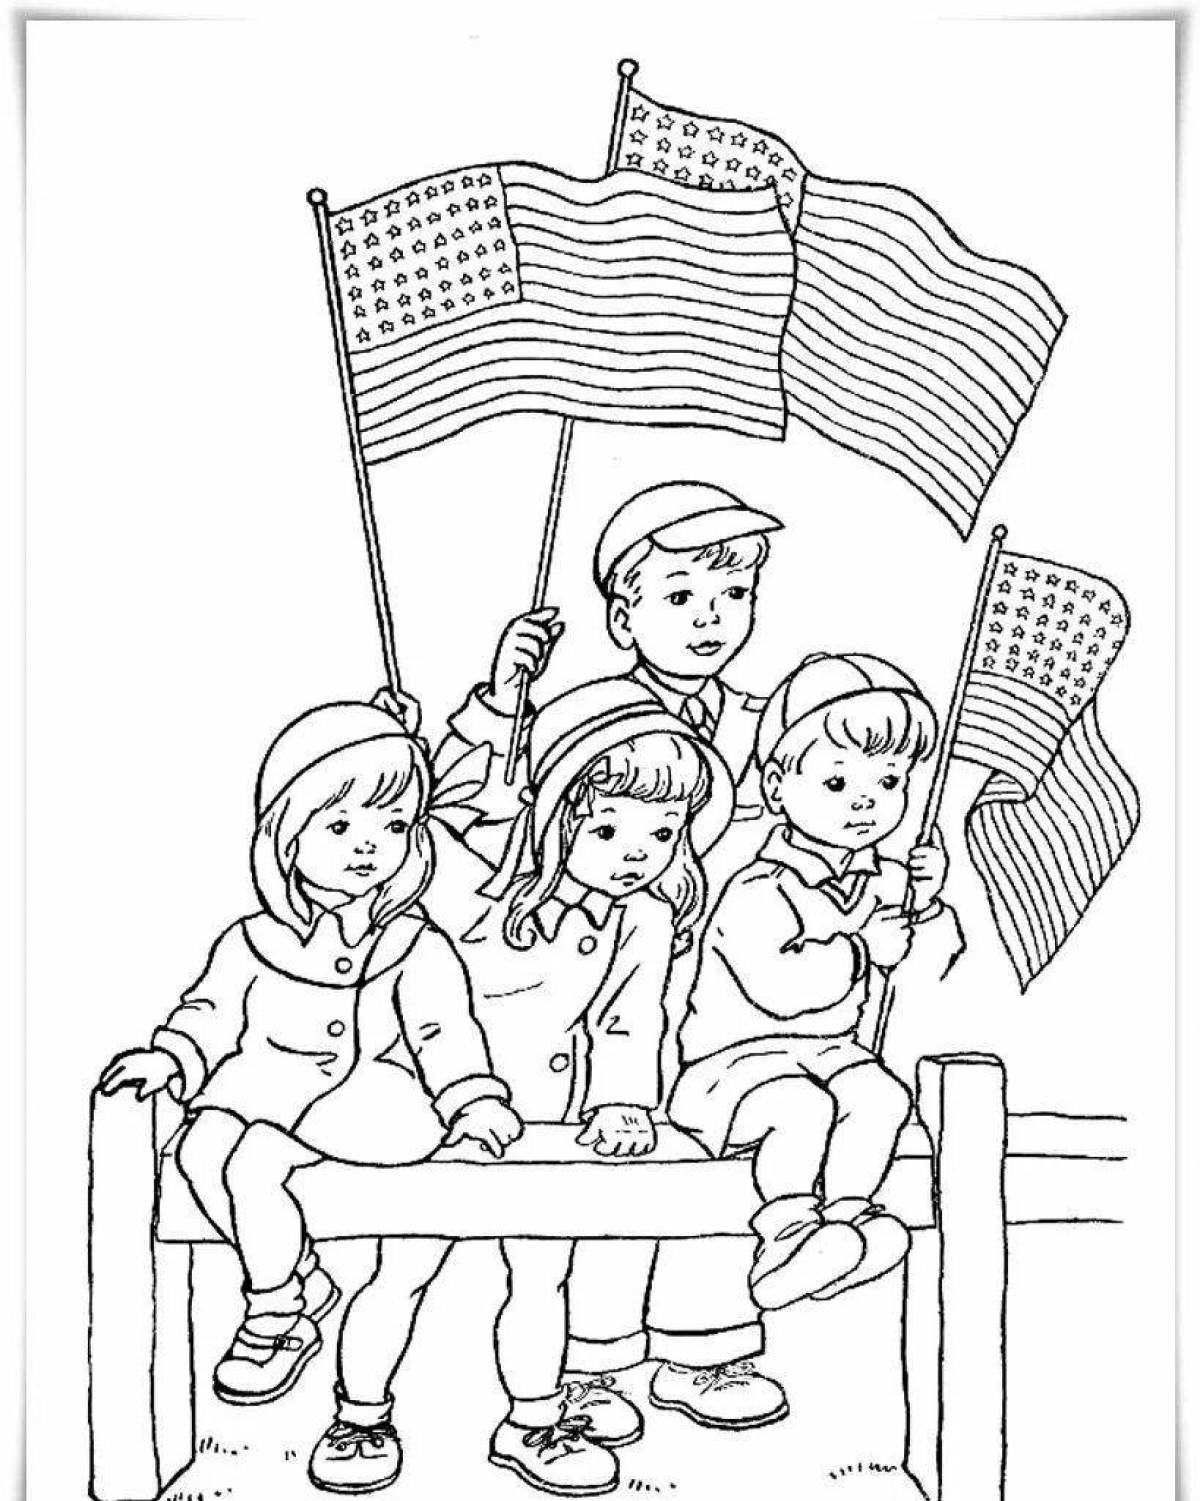 Coloring page with vibrant civic content